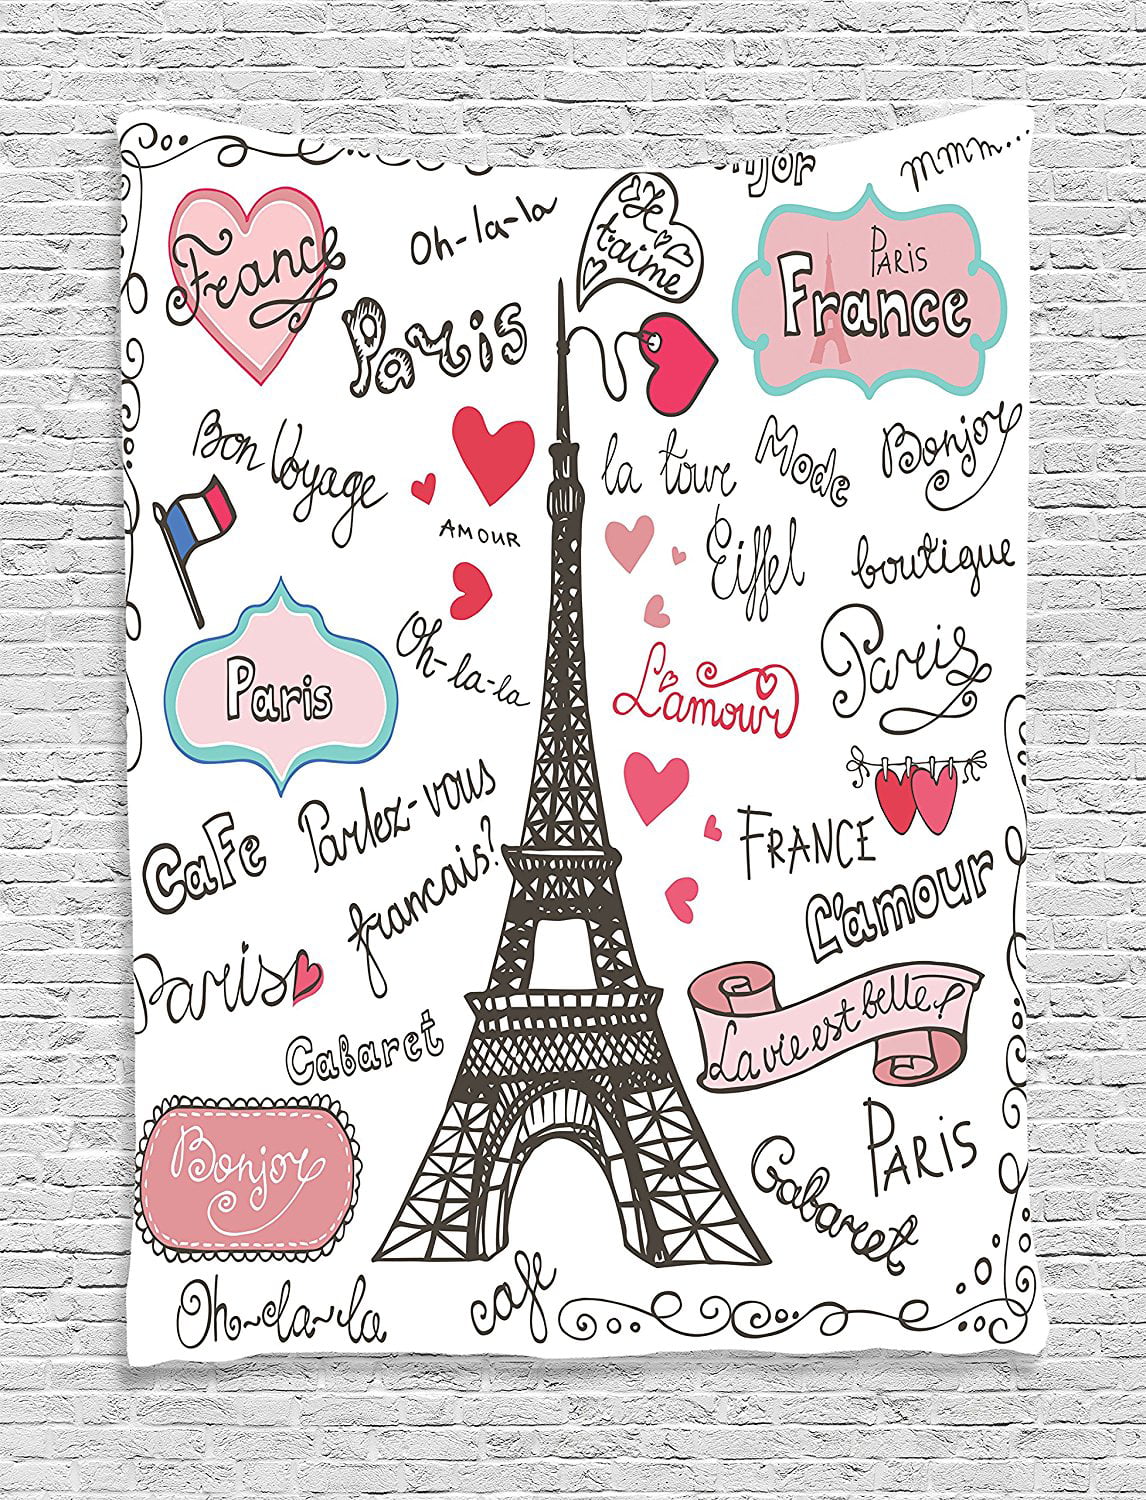 Eiffel Tower Decor Tapestry Wall Hanging By , Paris Symbols Lettering Heart Shapes Flag Ornamental Sketchy Doodle Decorative, Bedroom Living Room Dorm Decor, 60 W x.., By Ambesonne